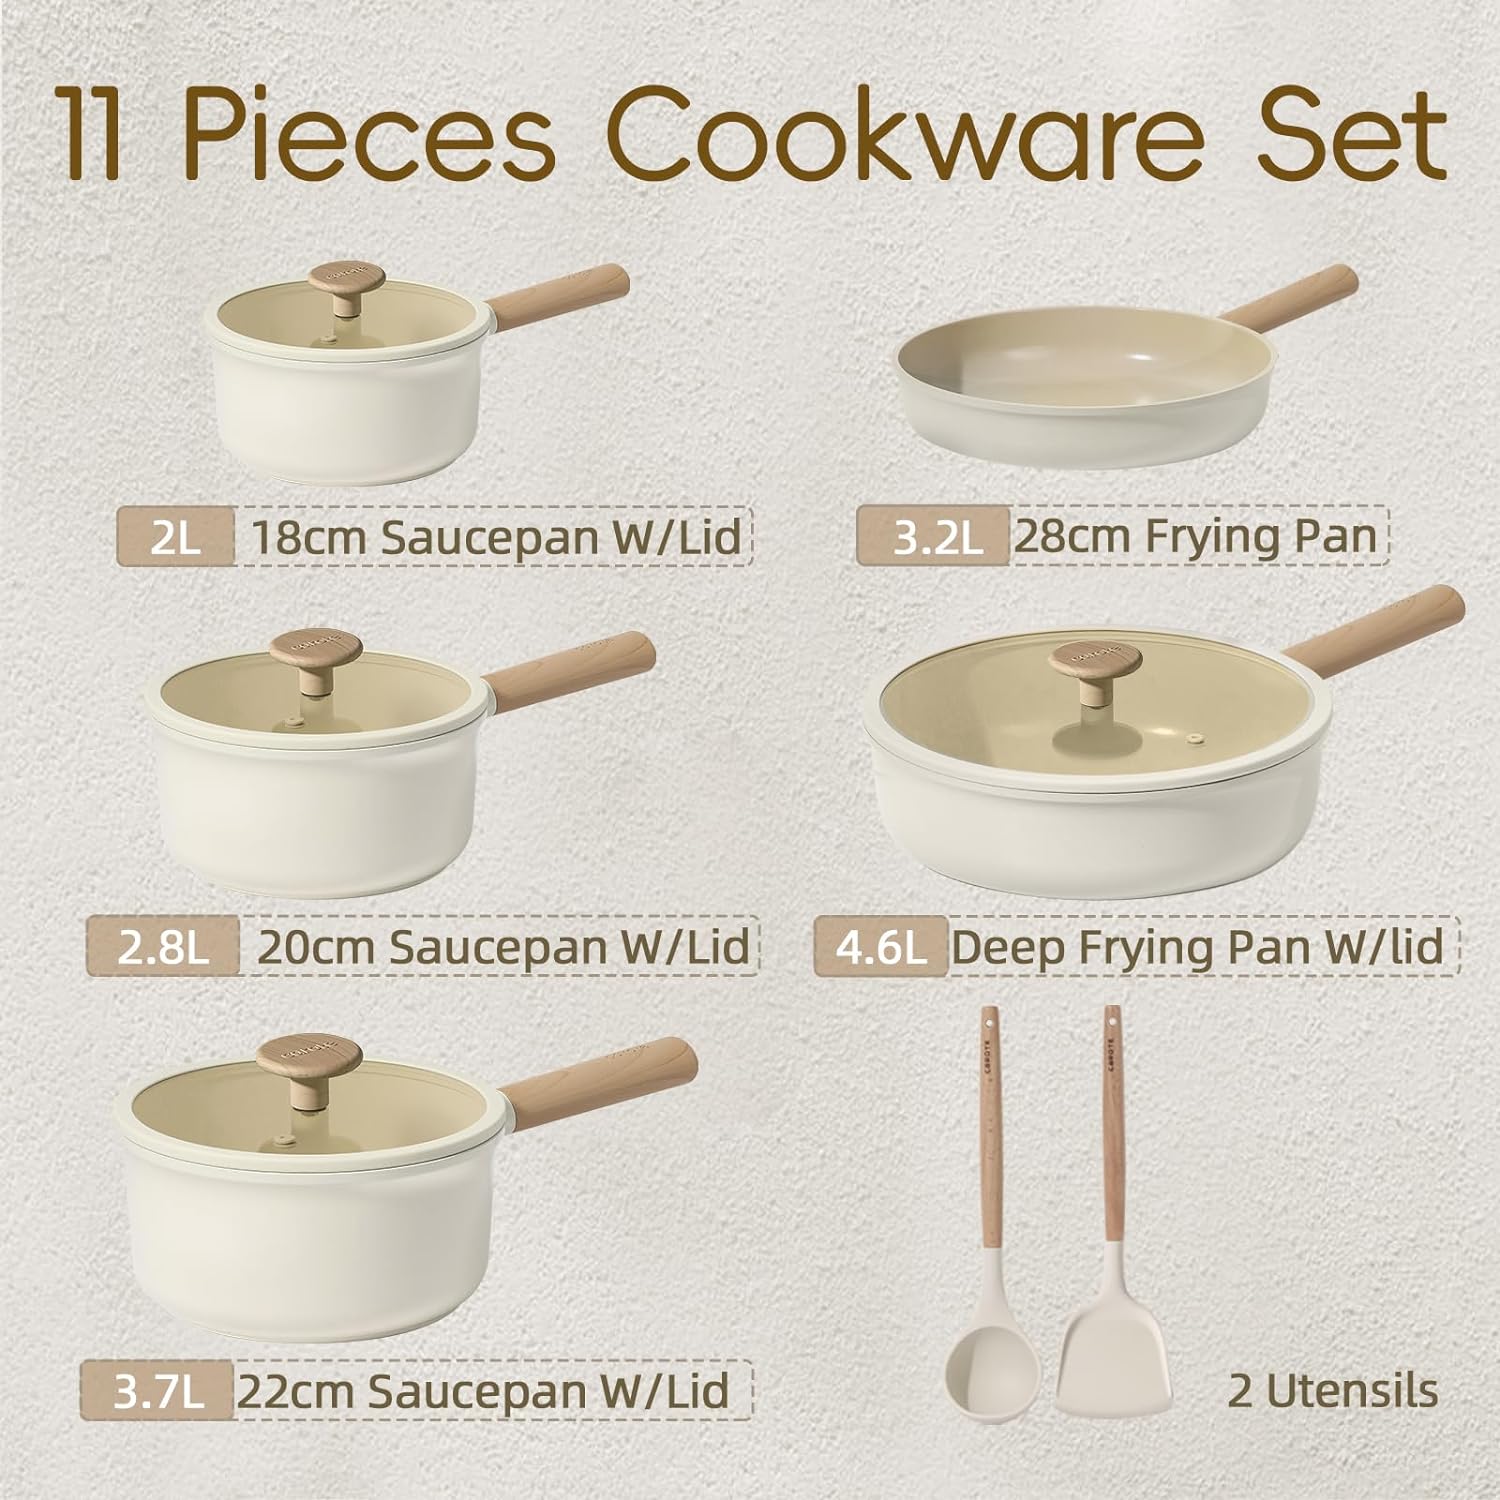 Ceramic Cookware Sets Feature